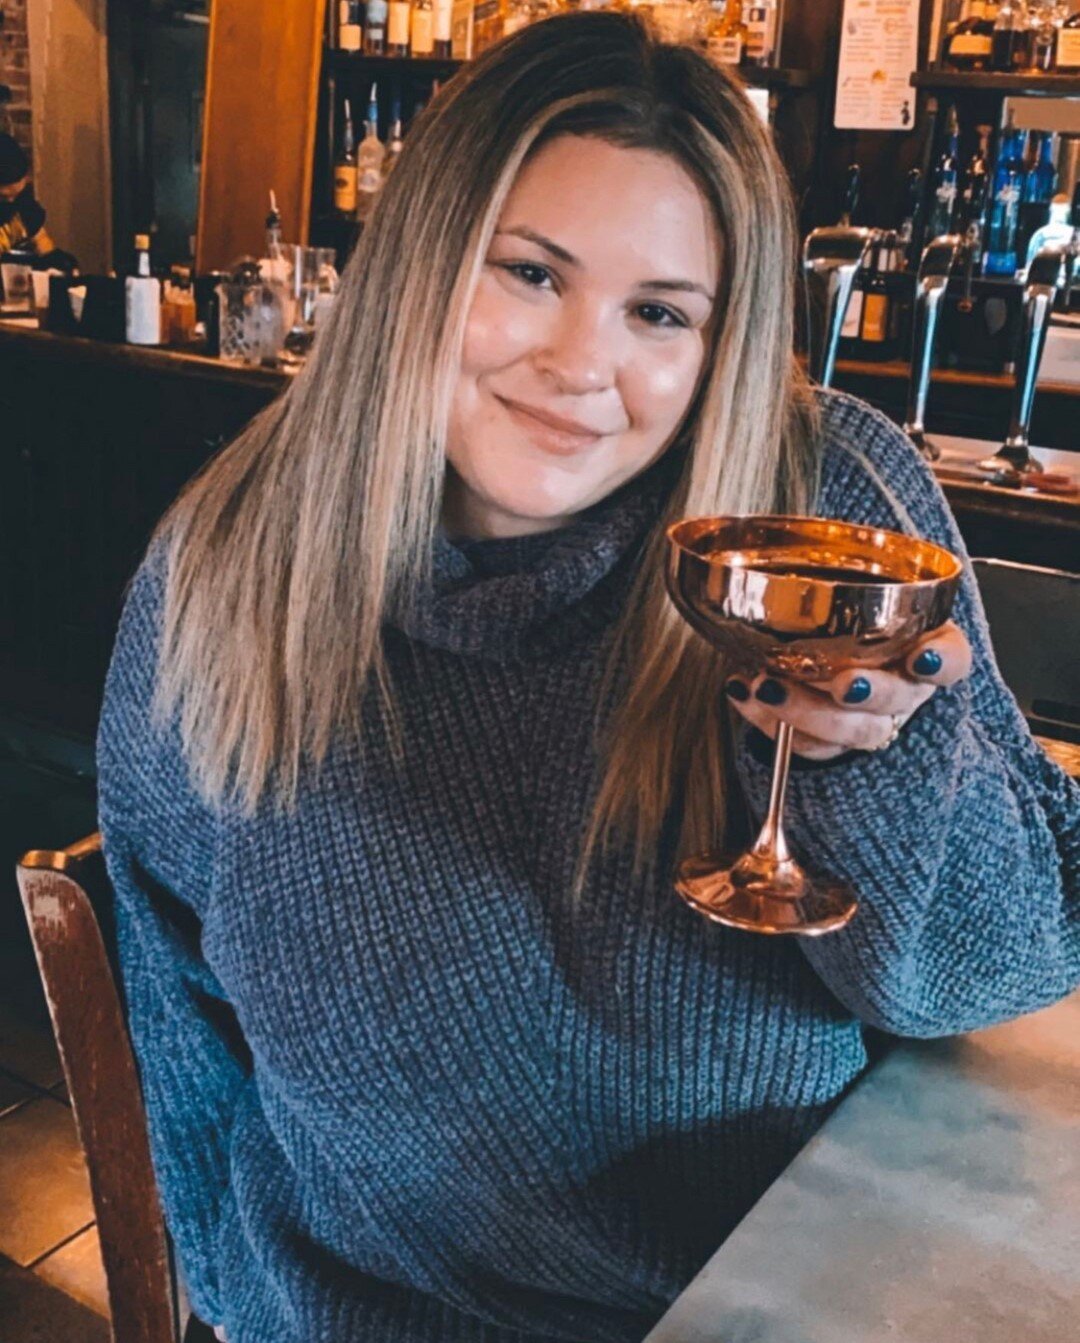 🥂 C H E E R S 🥂 Hope your Tuesday is as beautiful as all of our clients! #ArisaIRL #clientselfie⠀⠀⠀⠀⠀⠀⠀⠀⠀
.⠀⠀⠀⠀⠀⠀⠀⠀⠀
.⠀⠀⠀⠀⠀⠀⠀⠀⠀
.⠀⠀⠀⠀⠀⠀⠀⠀⠀
.⠀⠀⠀⠀⠀⠀⠀⠀⠀
.⠀⠀⠀⠀⠀⠀⠀⠀⠀
#arisahairny #chelseanyc #nyhair #nychair #tuesdaymotivation #cheers #positivevibesonly